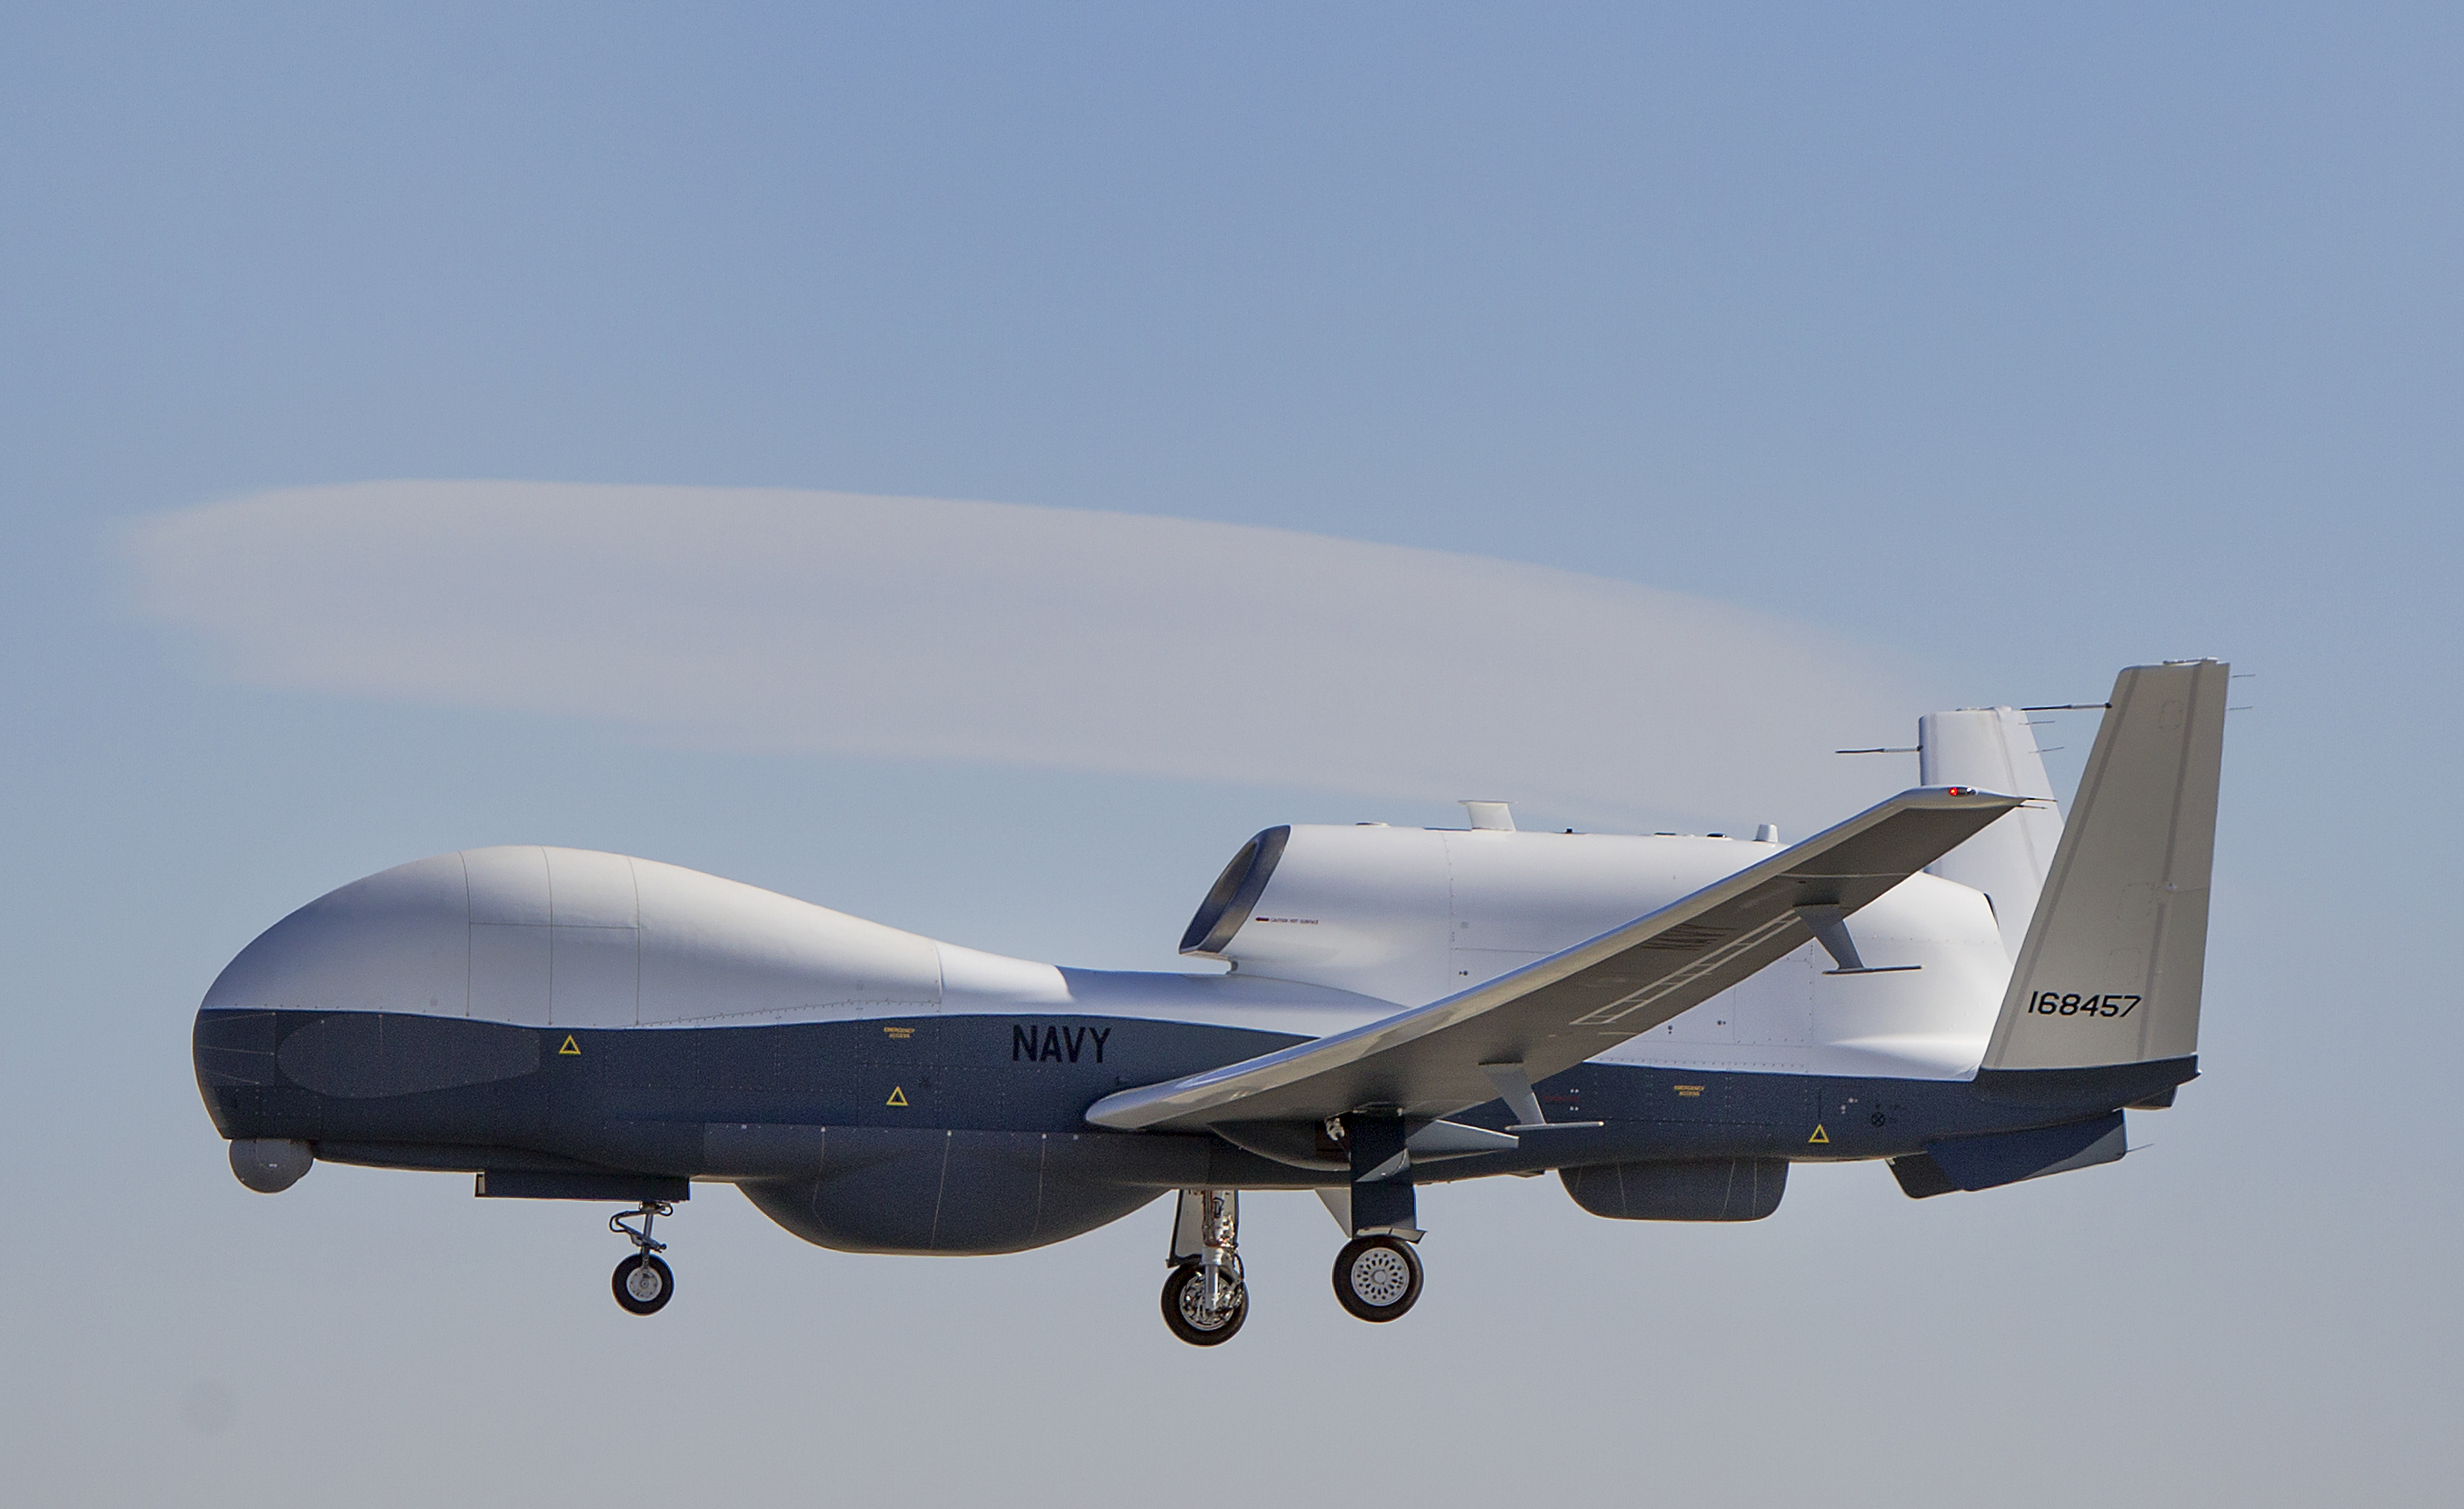 Triton unmanned aircraft system completes its first flight May 22, 2013. US Navy Photo